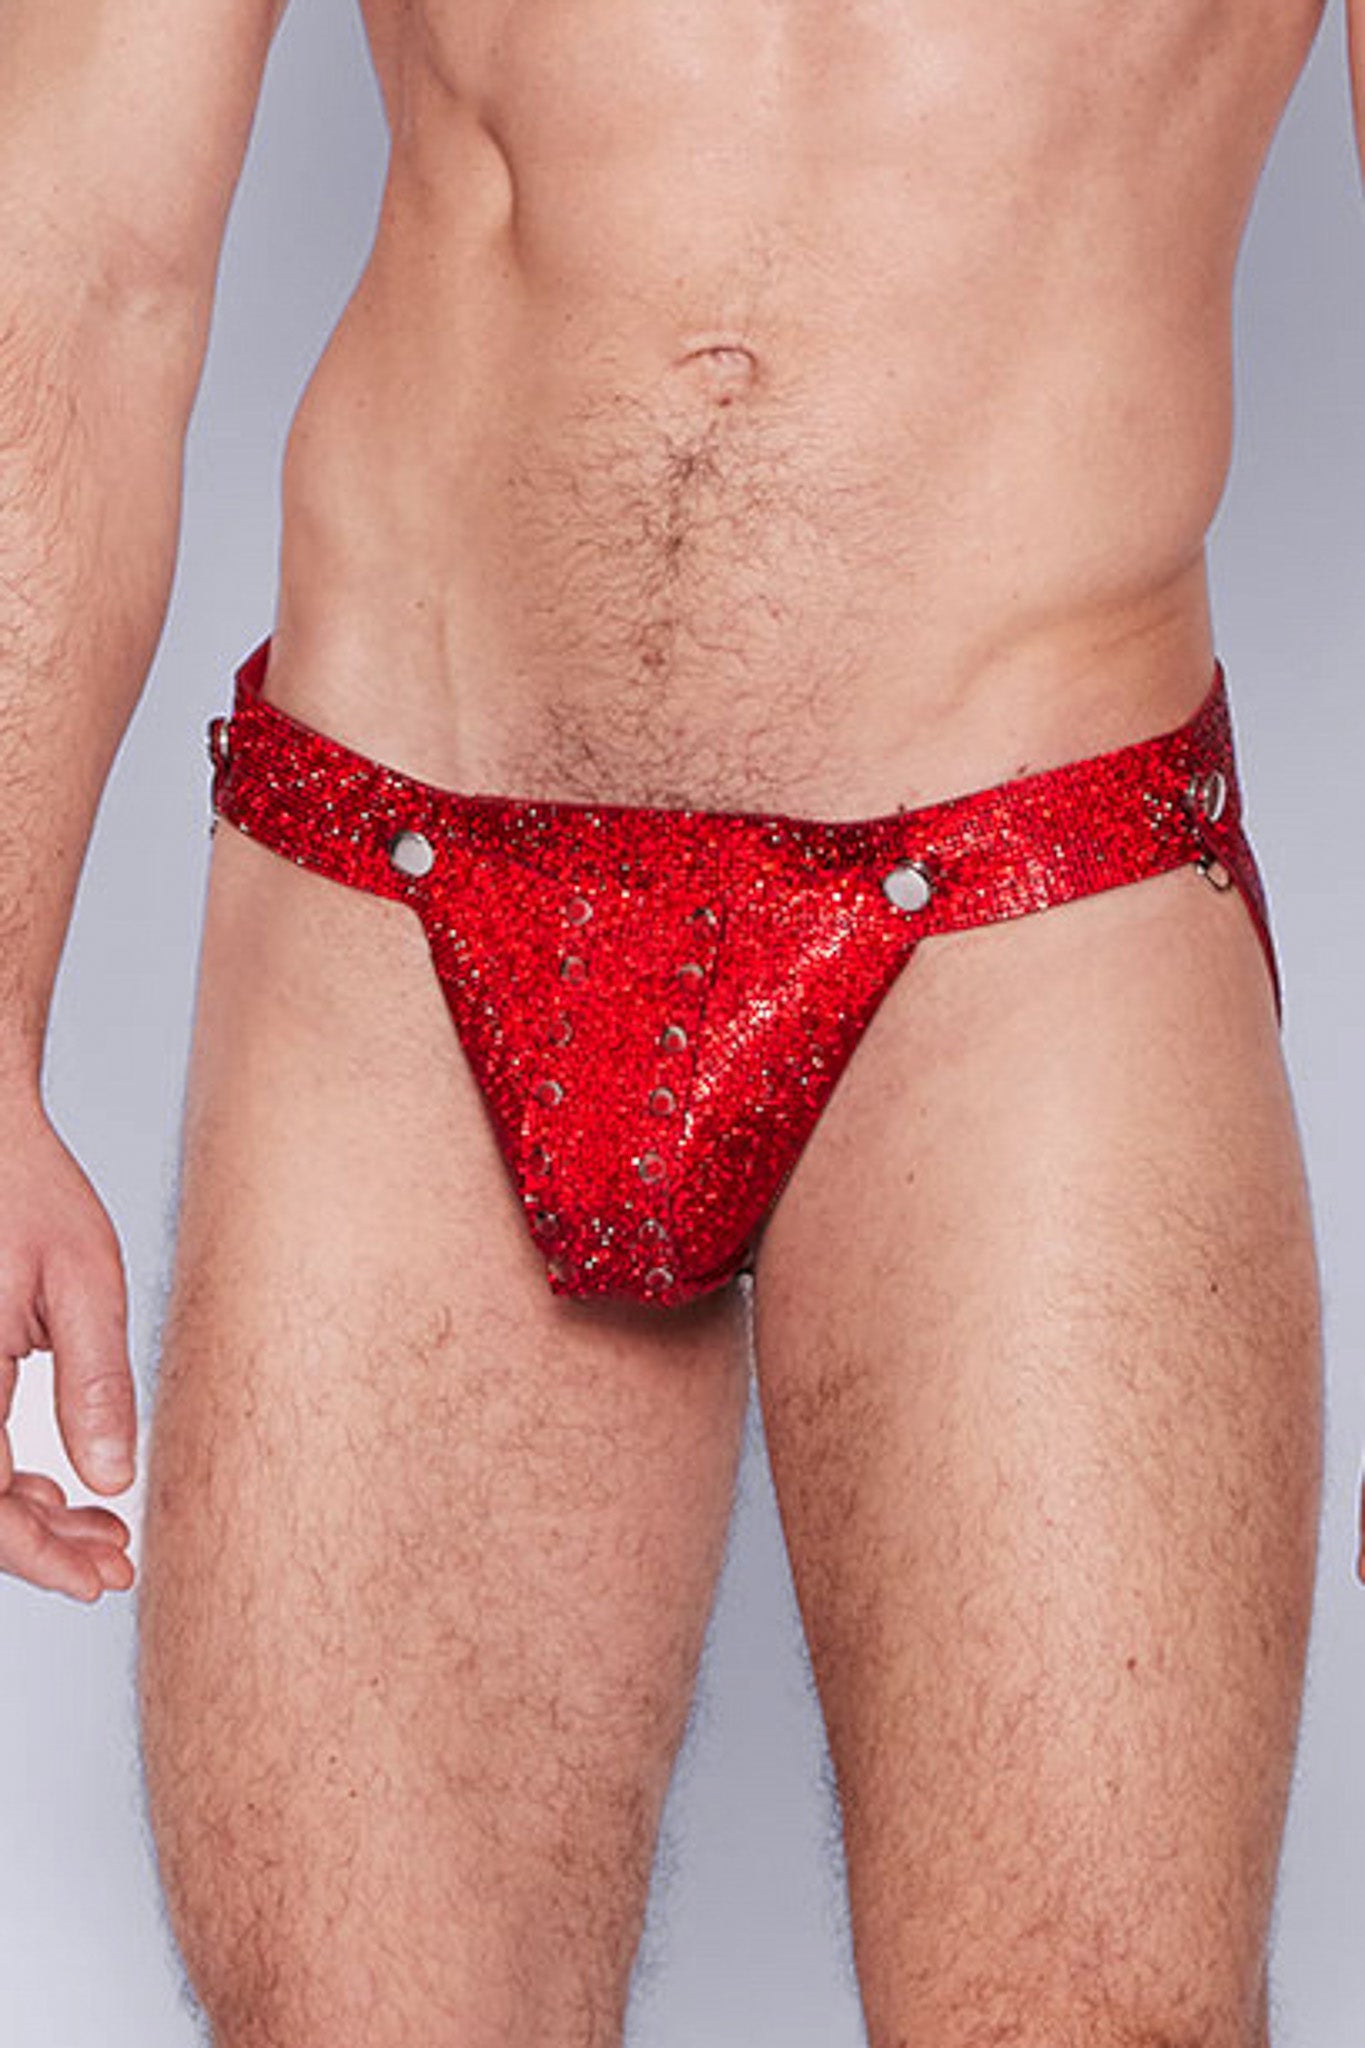 Seductive red crystal jockstrap, a daring and glamorous choice for adding flair to your intimate wear collection.